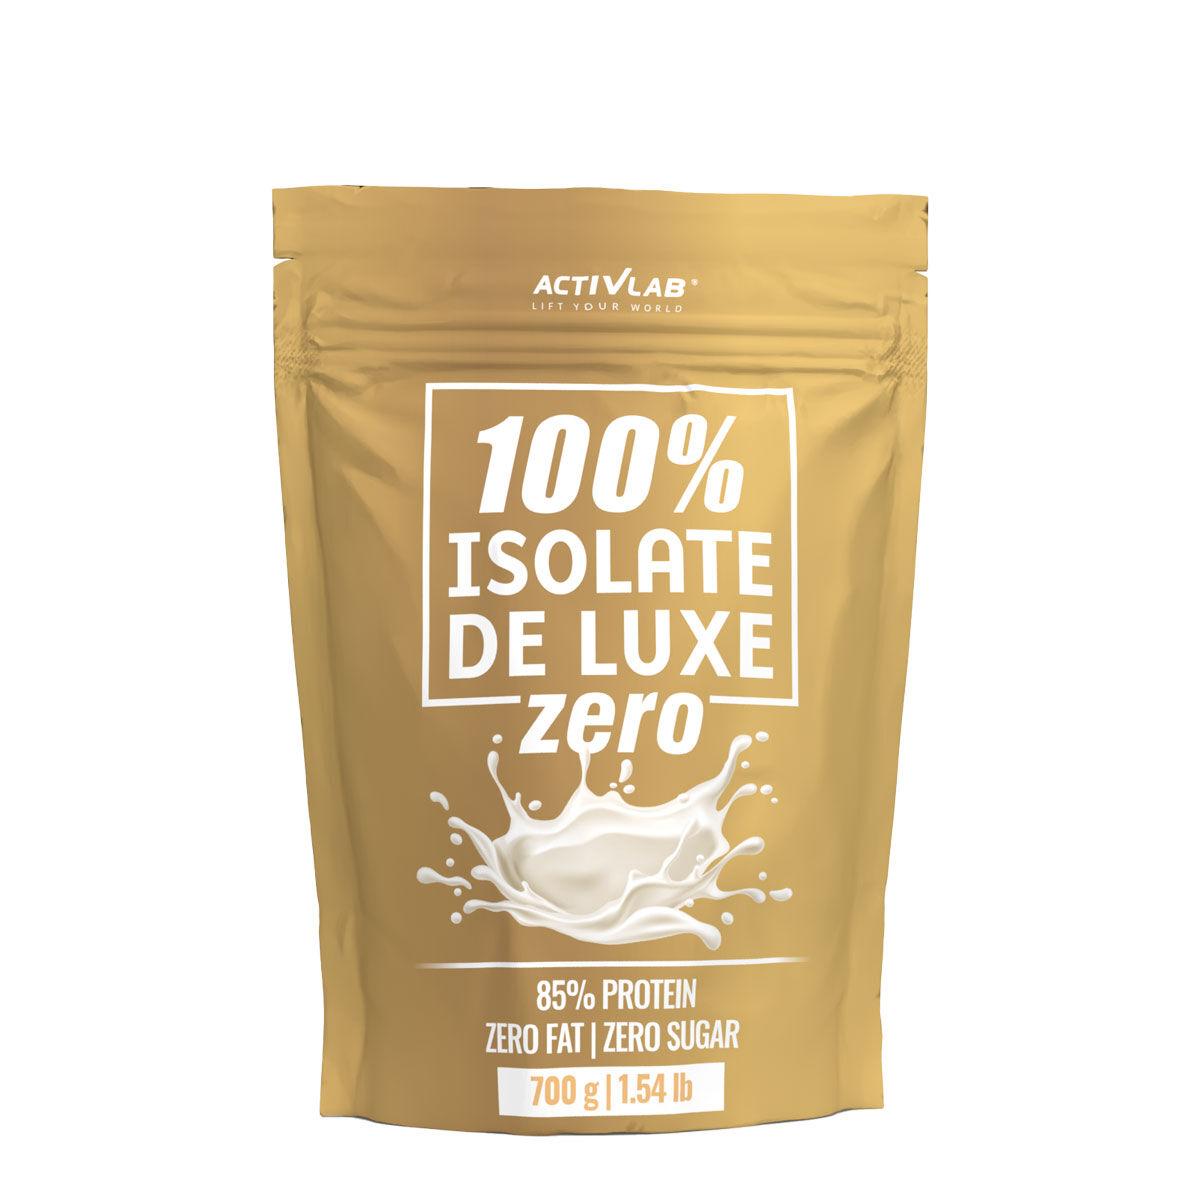 Selected image for ACTIVLAB Whey protein Isolate 100% de Luxe zero neutral 700g